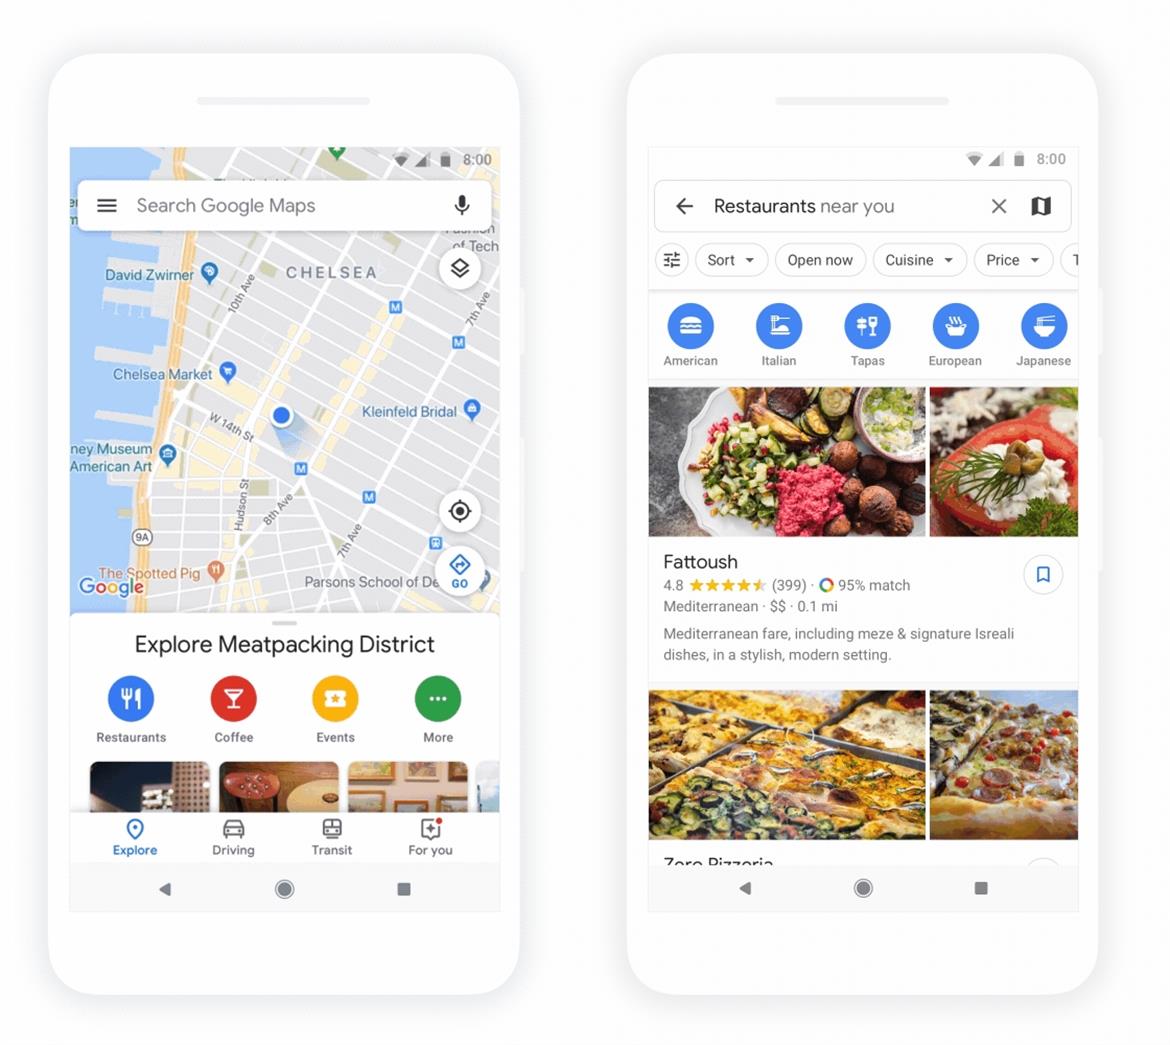 Google Maps Major Design Overhaul With Personalized Recommendations Is Now Rolling Out